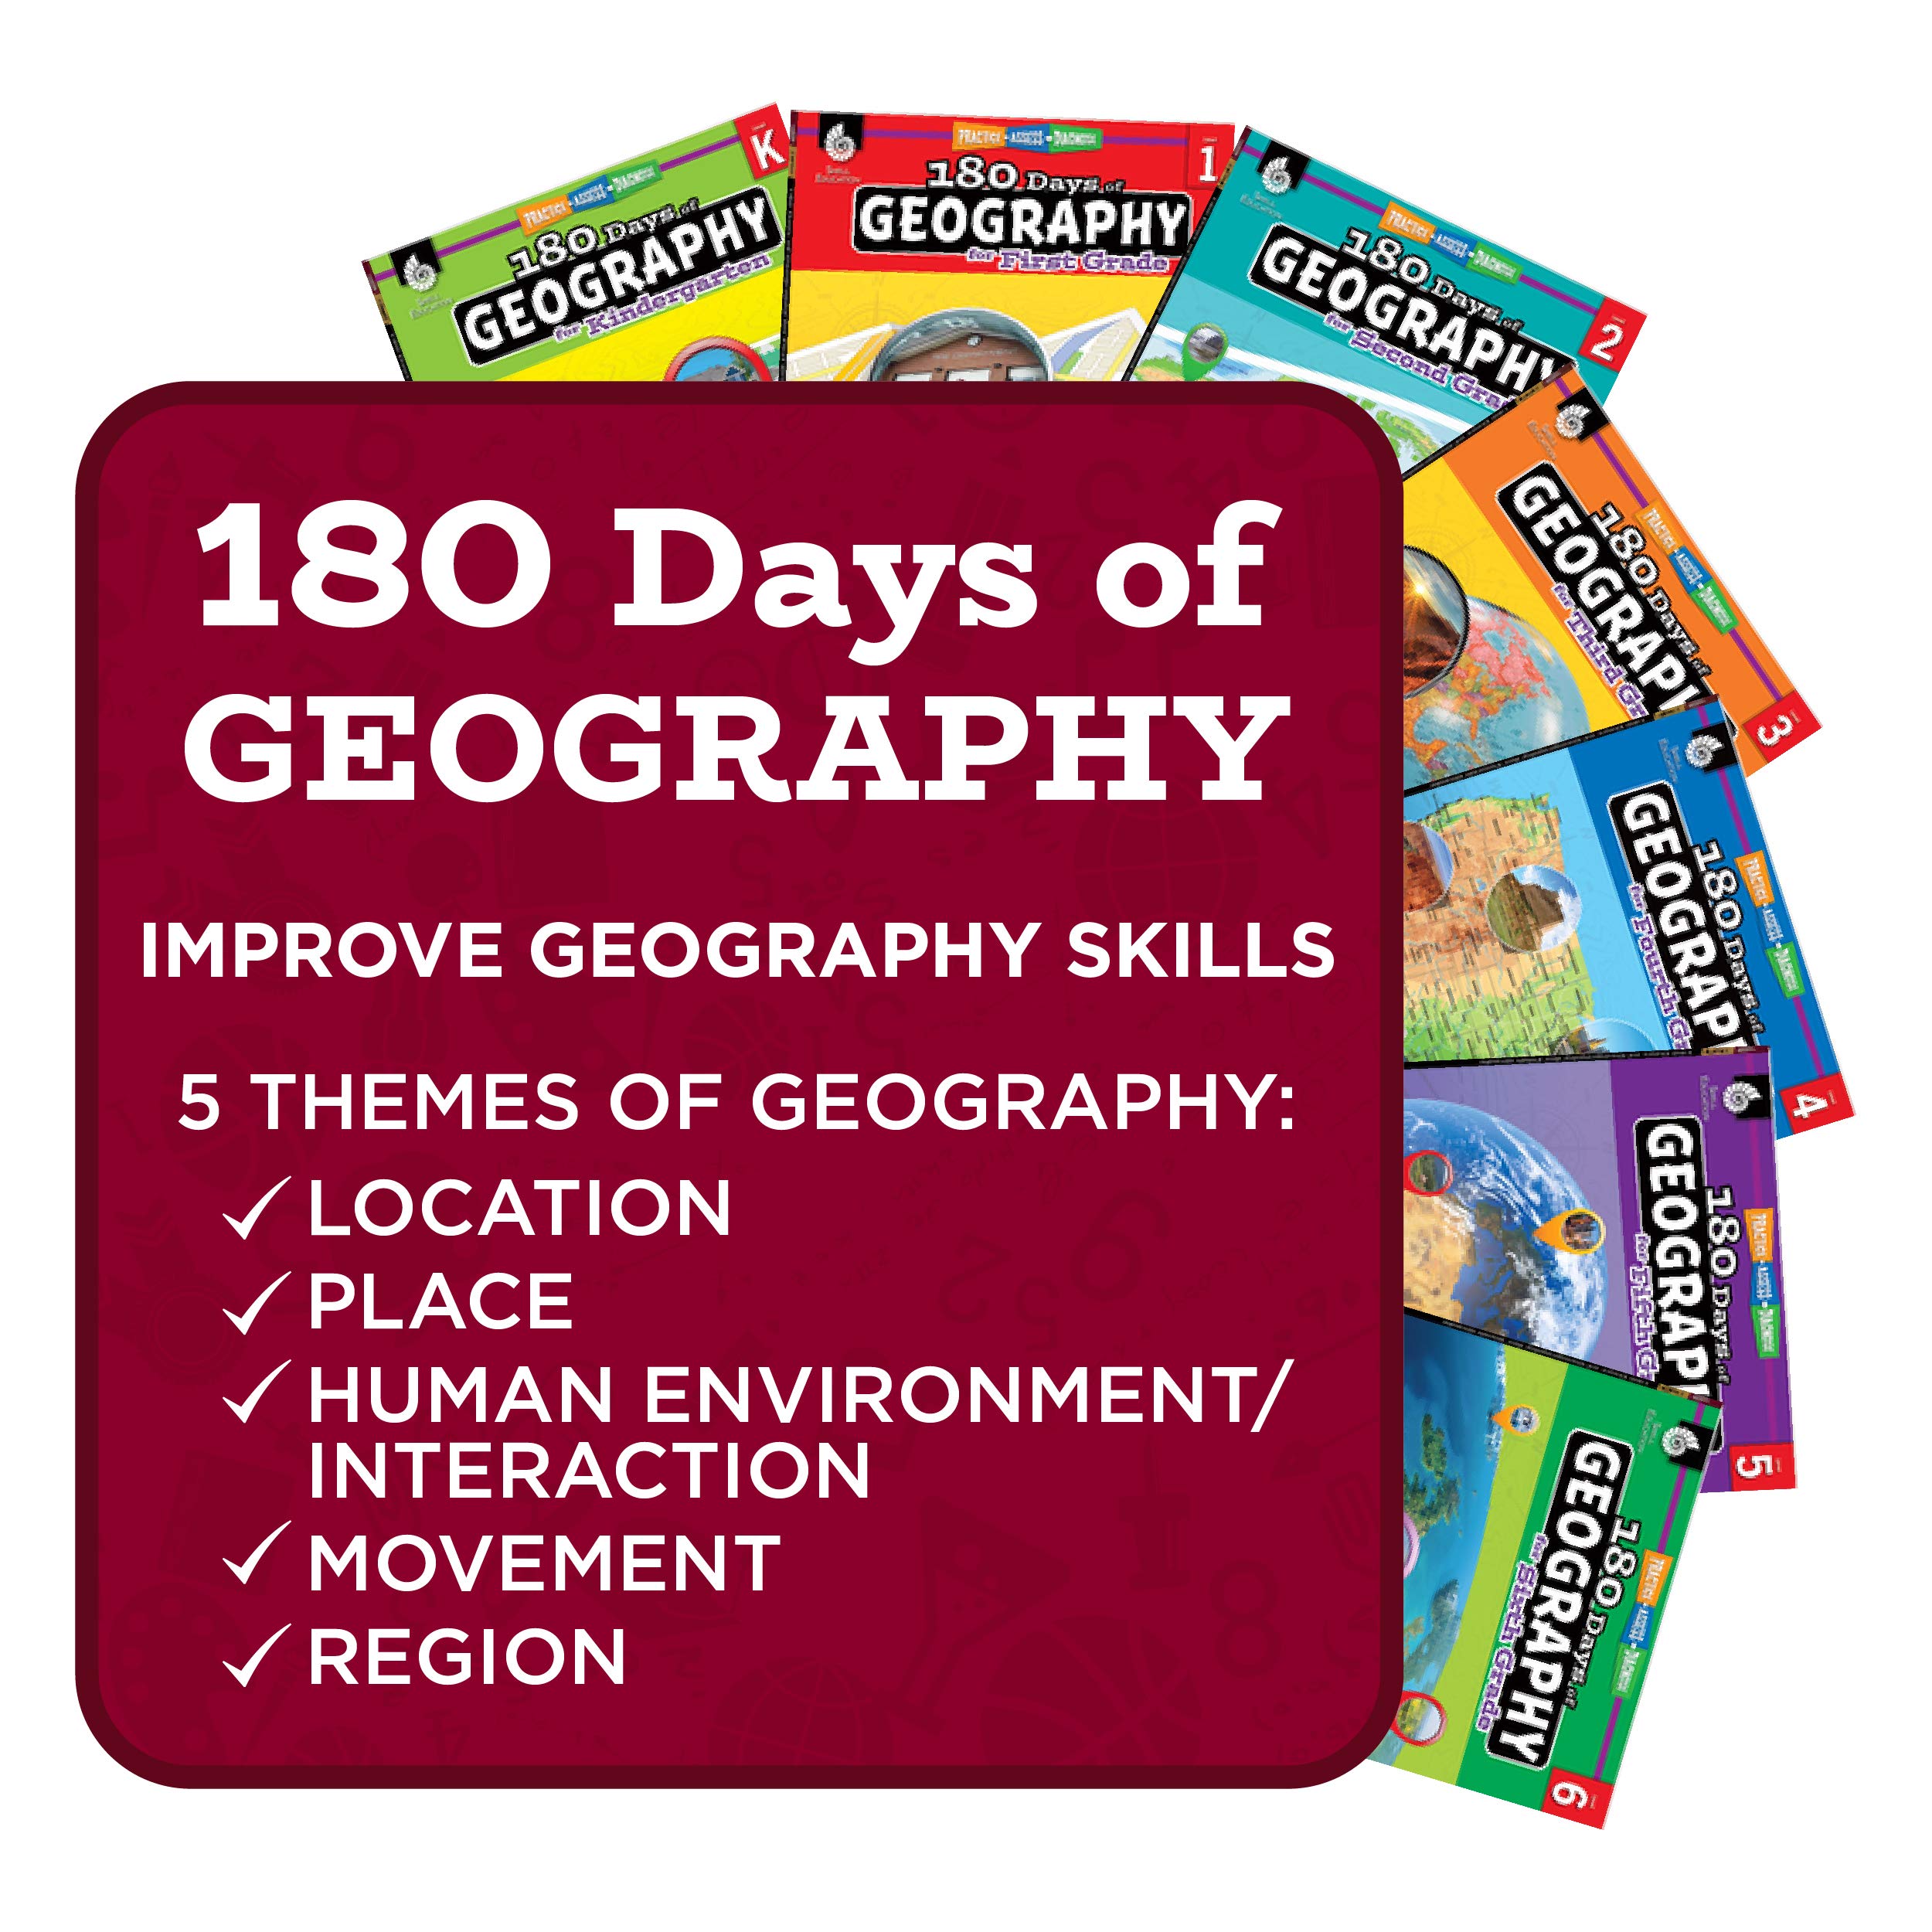 180 Days of Social Studies: Grade 6 - Daily Geography Workbook for Classroom and Home, Cool and Fun Practice, Elementary School Level Activities ... to Build Skills (Practice, Assess, Diagnose)